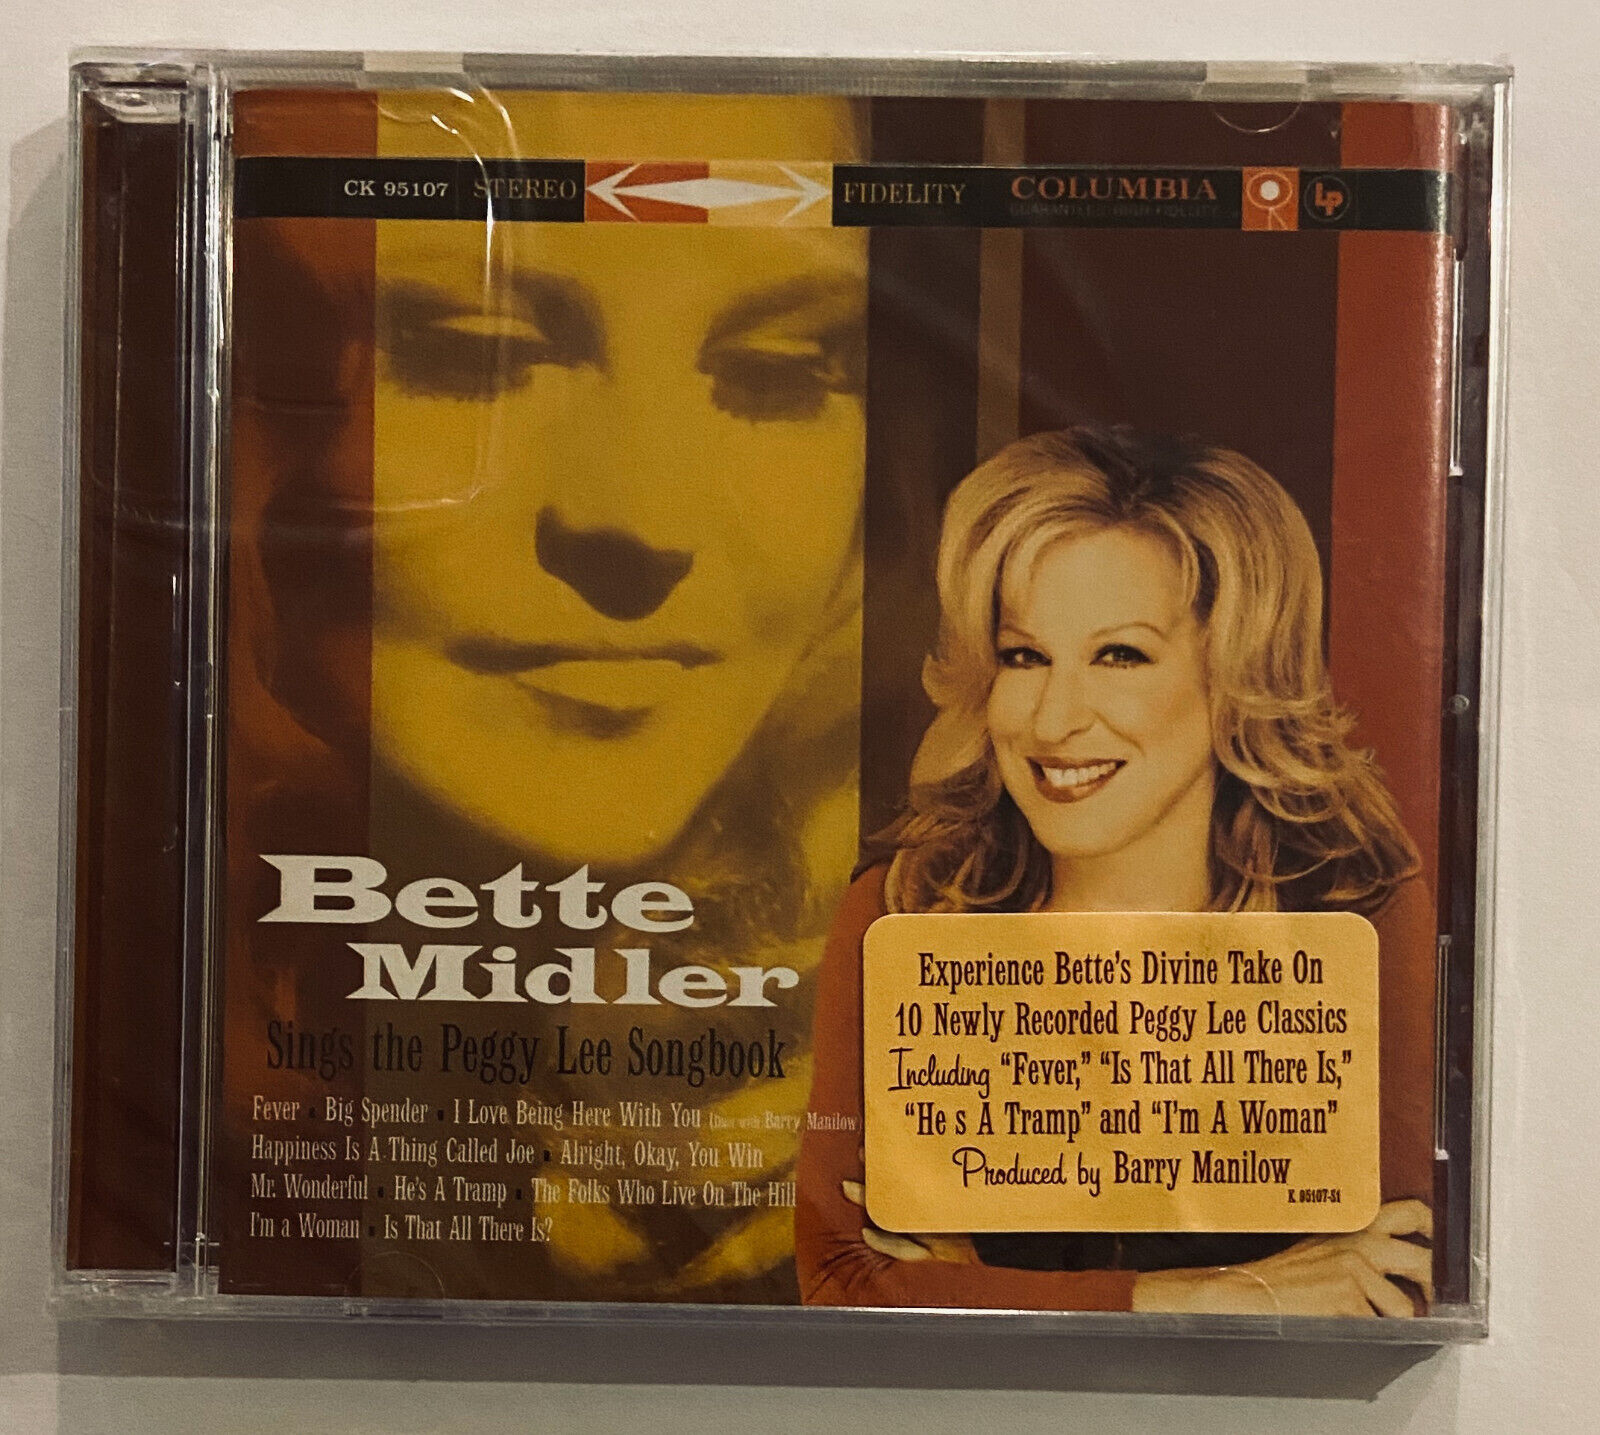 Bette Midler Sings the Peggy Lee Songbook 2005 CD Produced by Barry Manilow